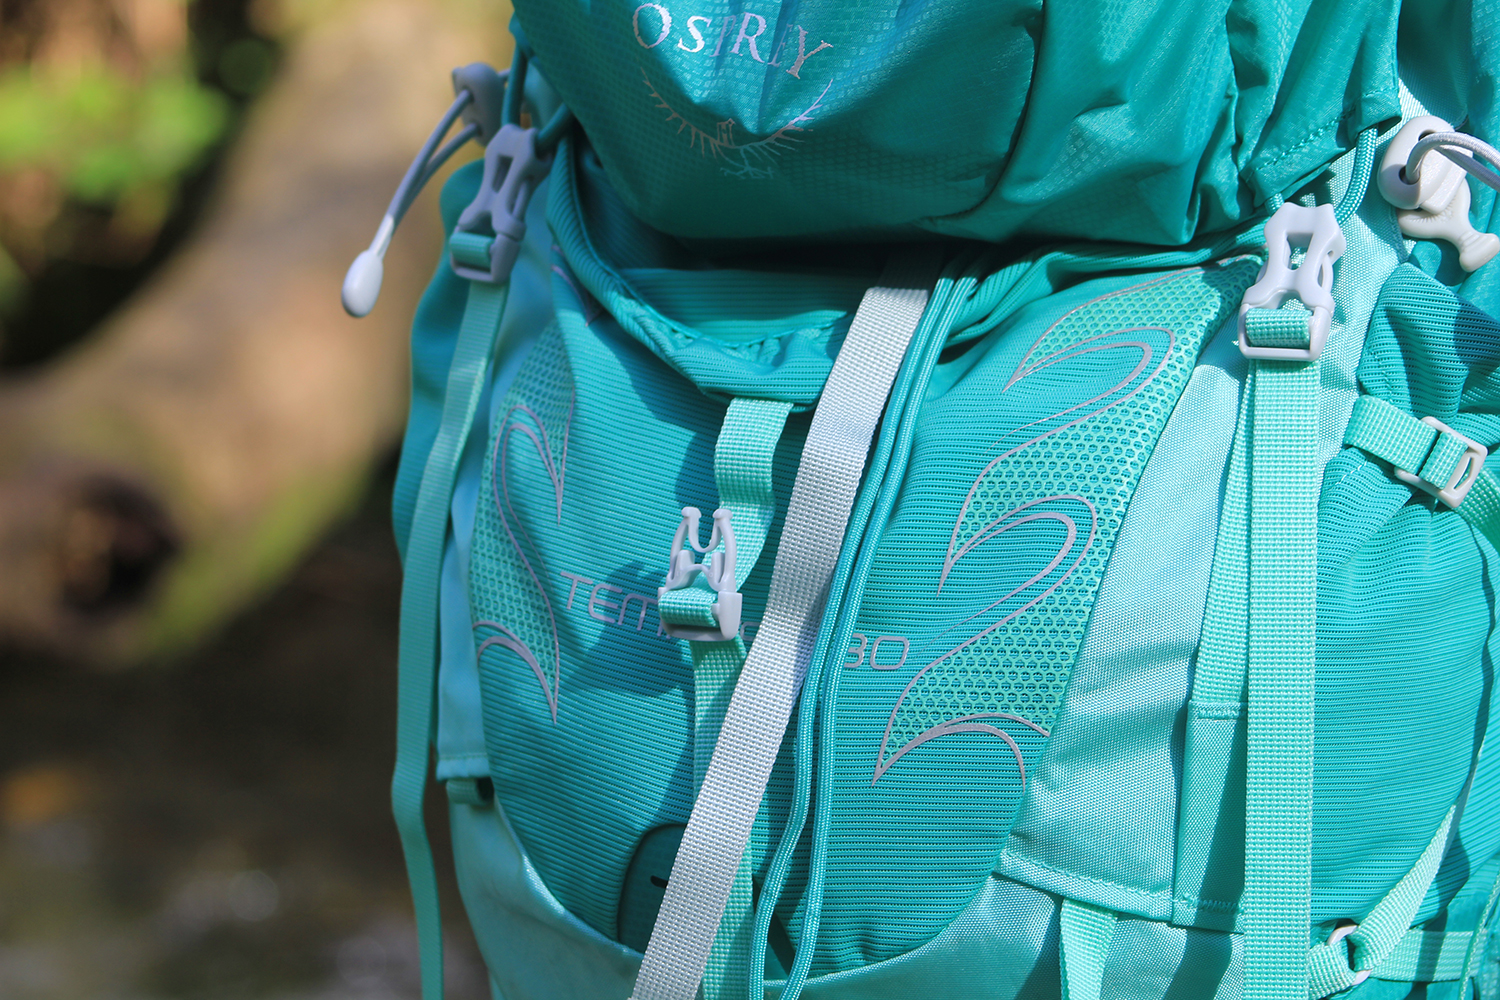 Osprey Tempect 30 Hiking Backpack Review